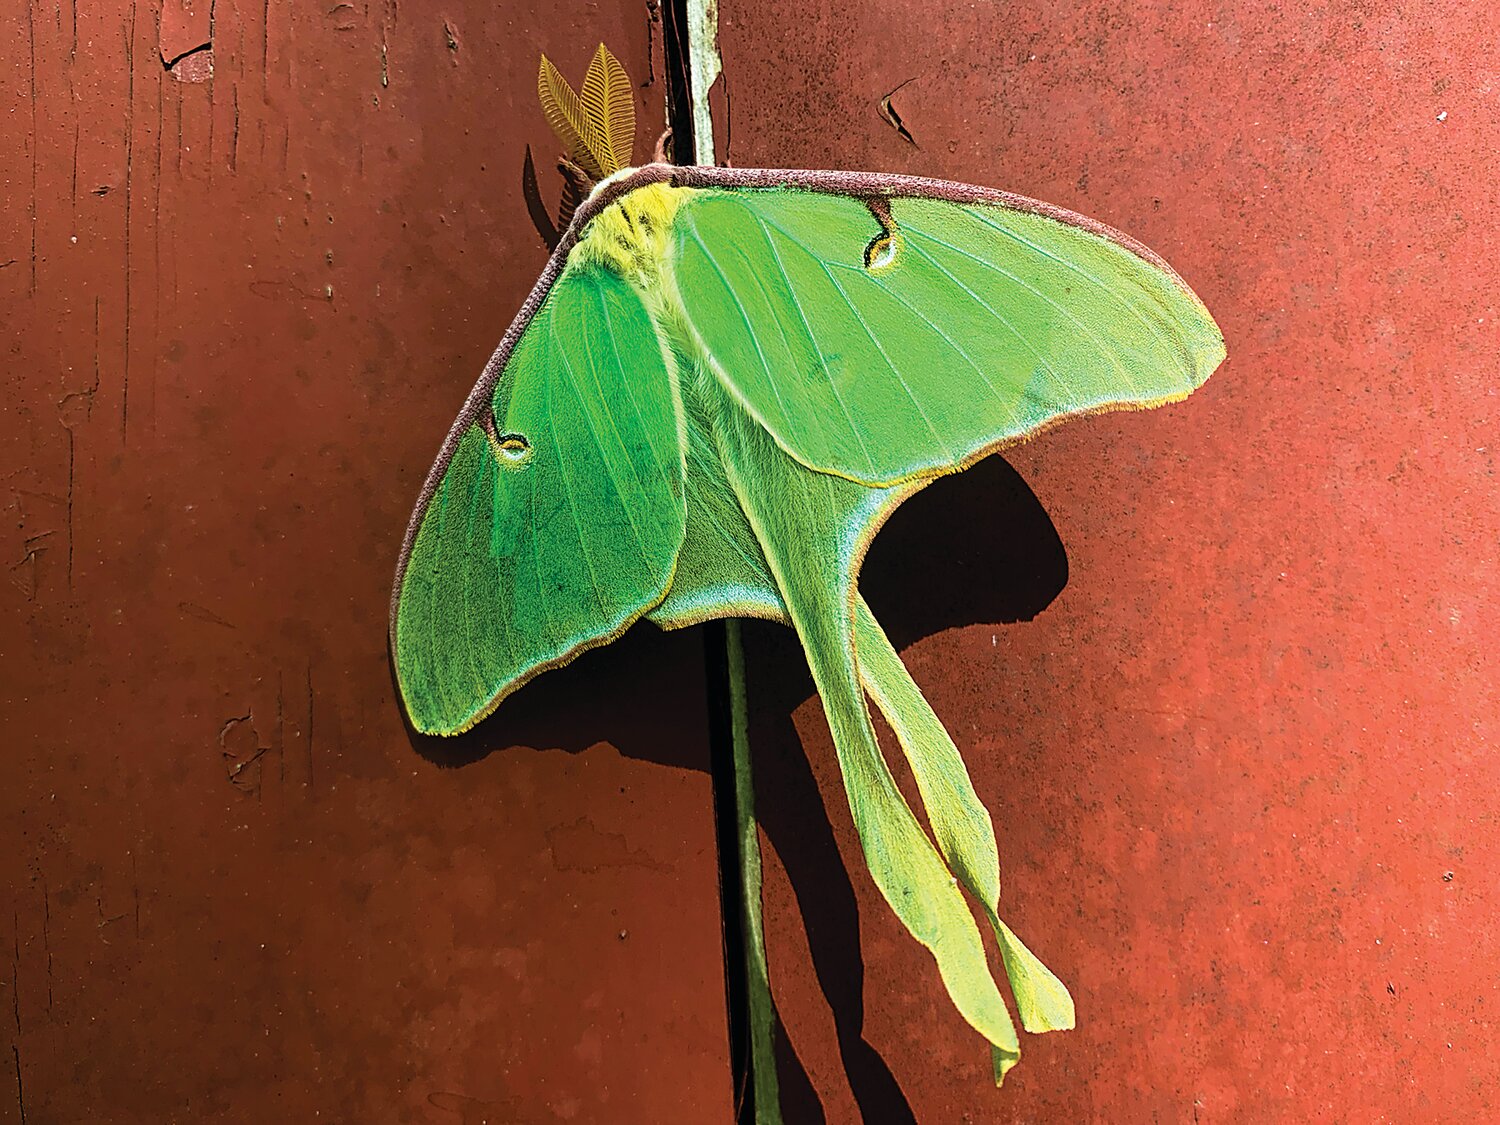 “Luna Moth” by Sydney Vine is a 2023 Friends of Princeton Open Space Photo Contest entry.